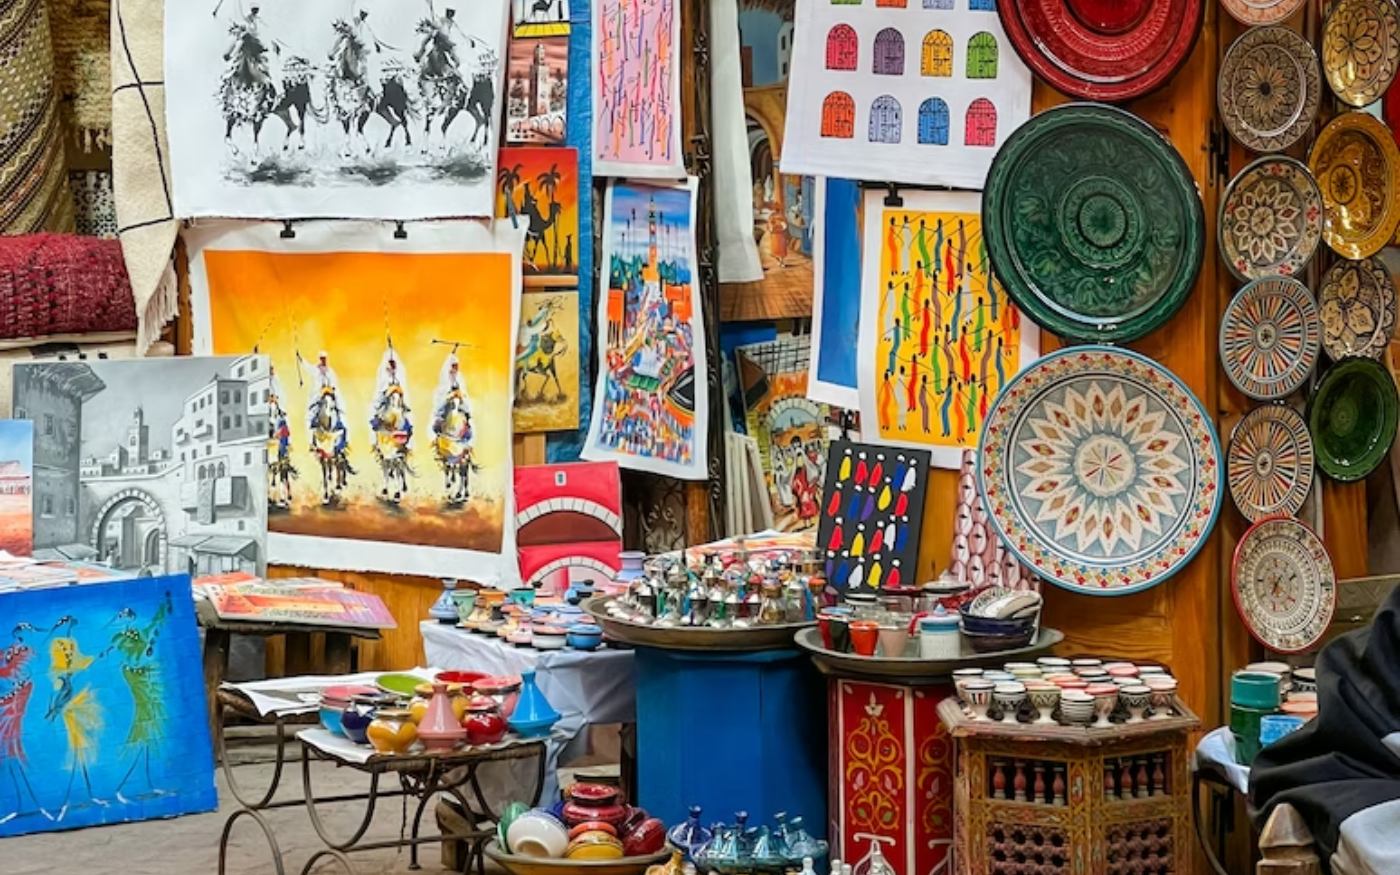 How to Negotiate at the Souks in Morocco